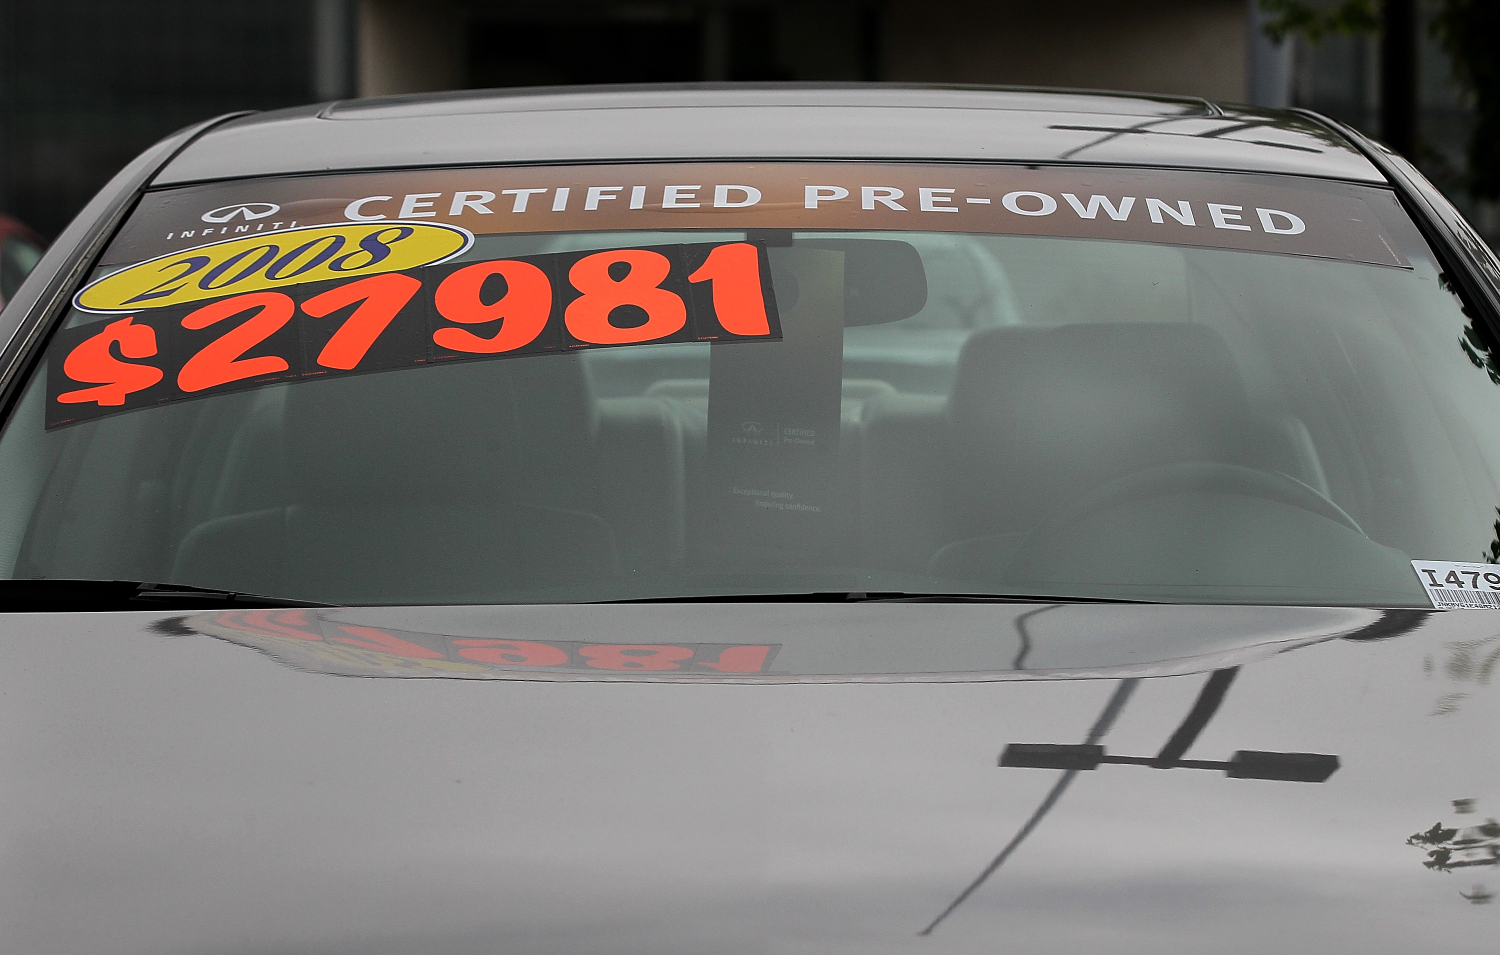 Used car warranties and what you need to know